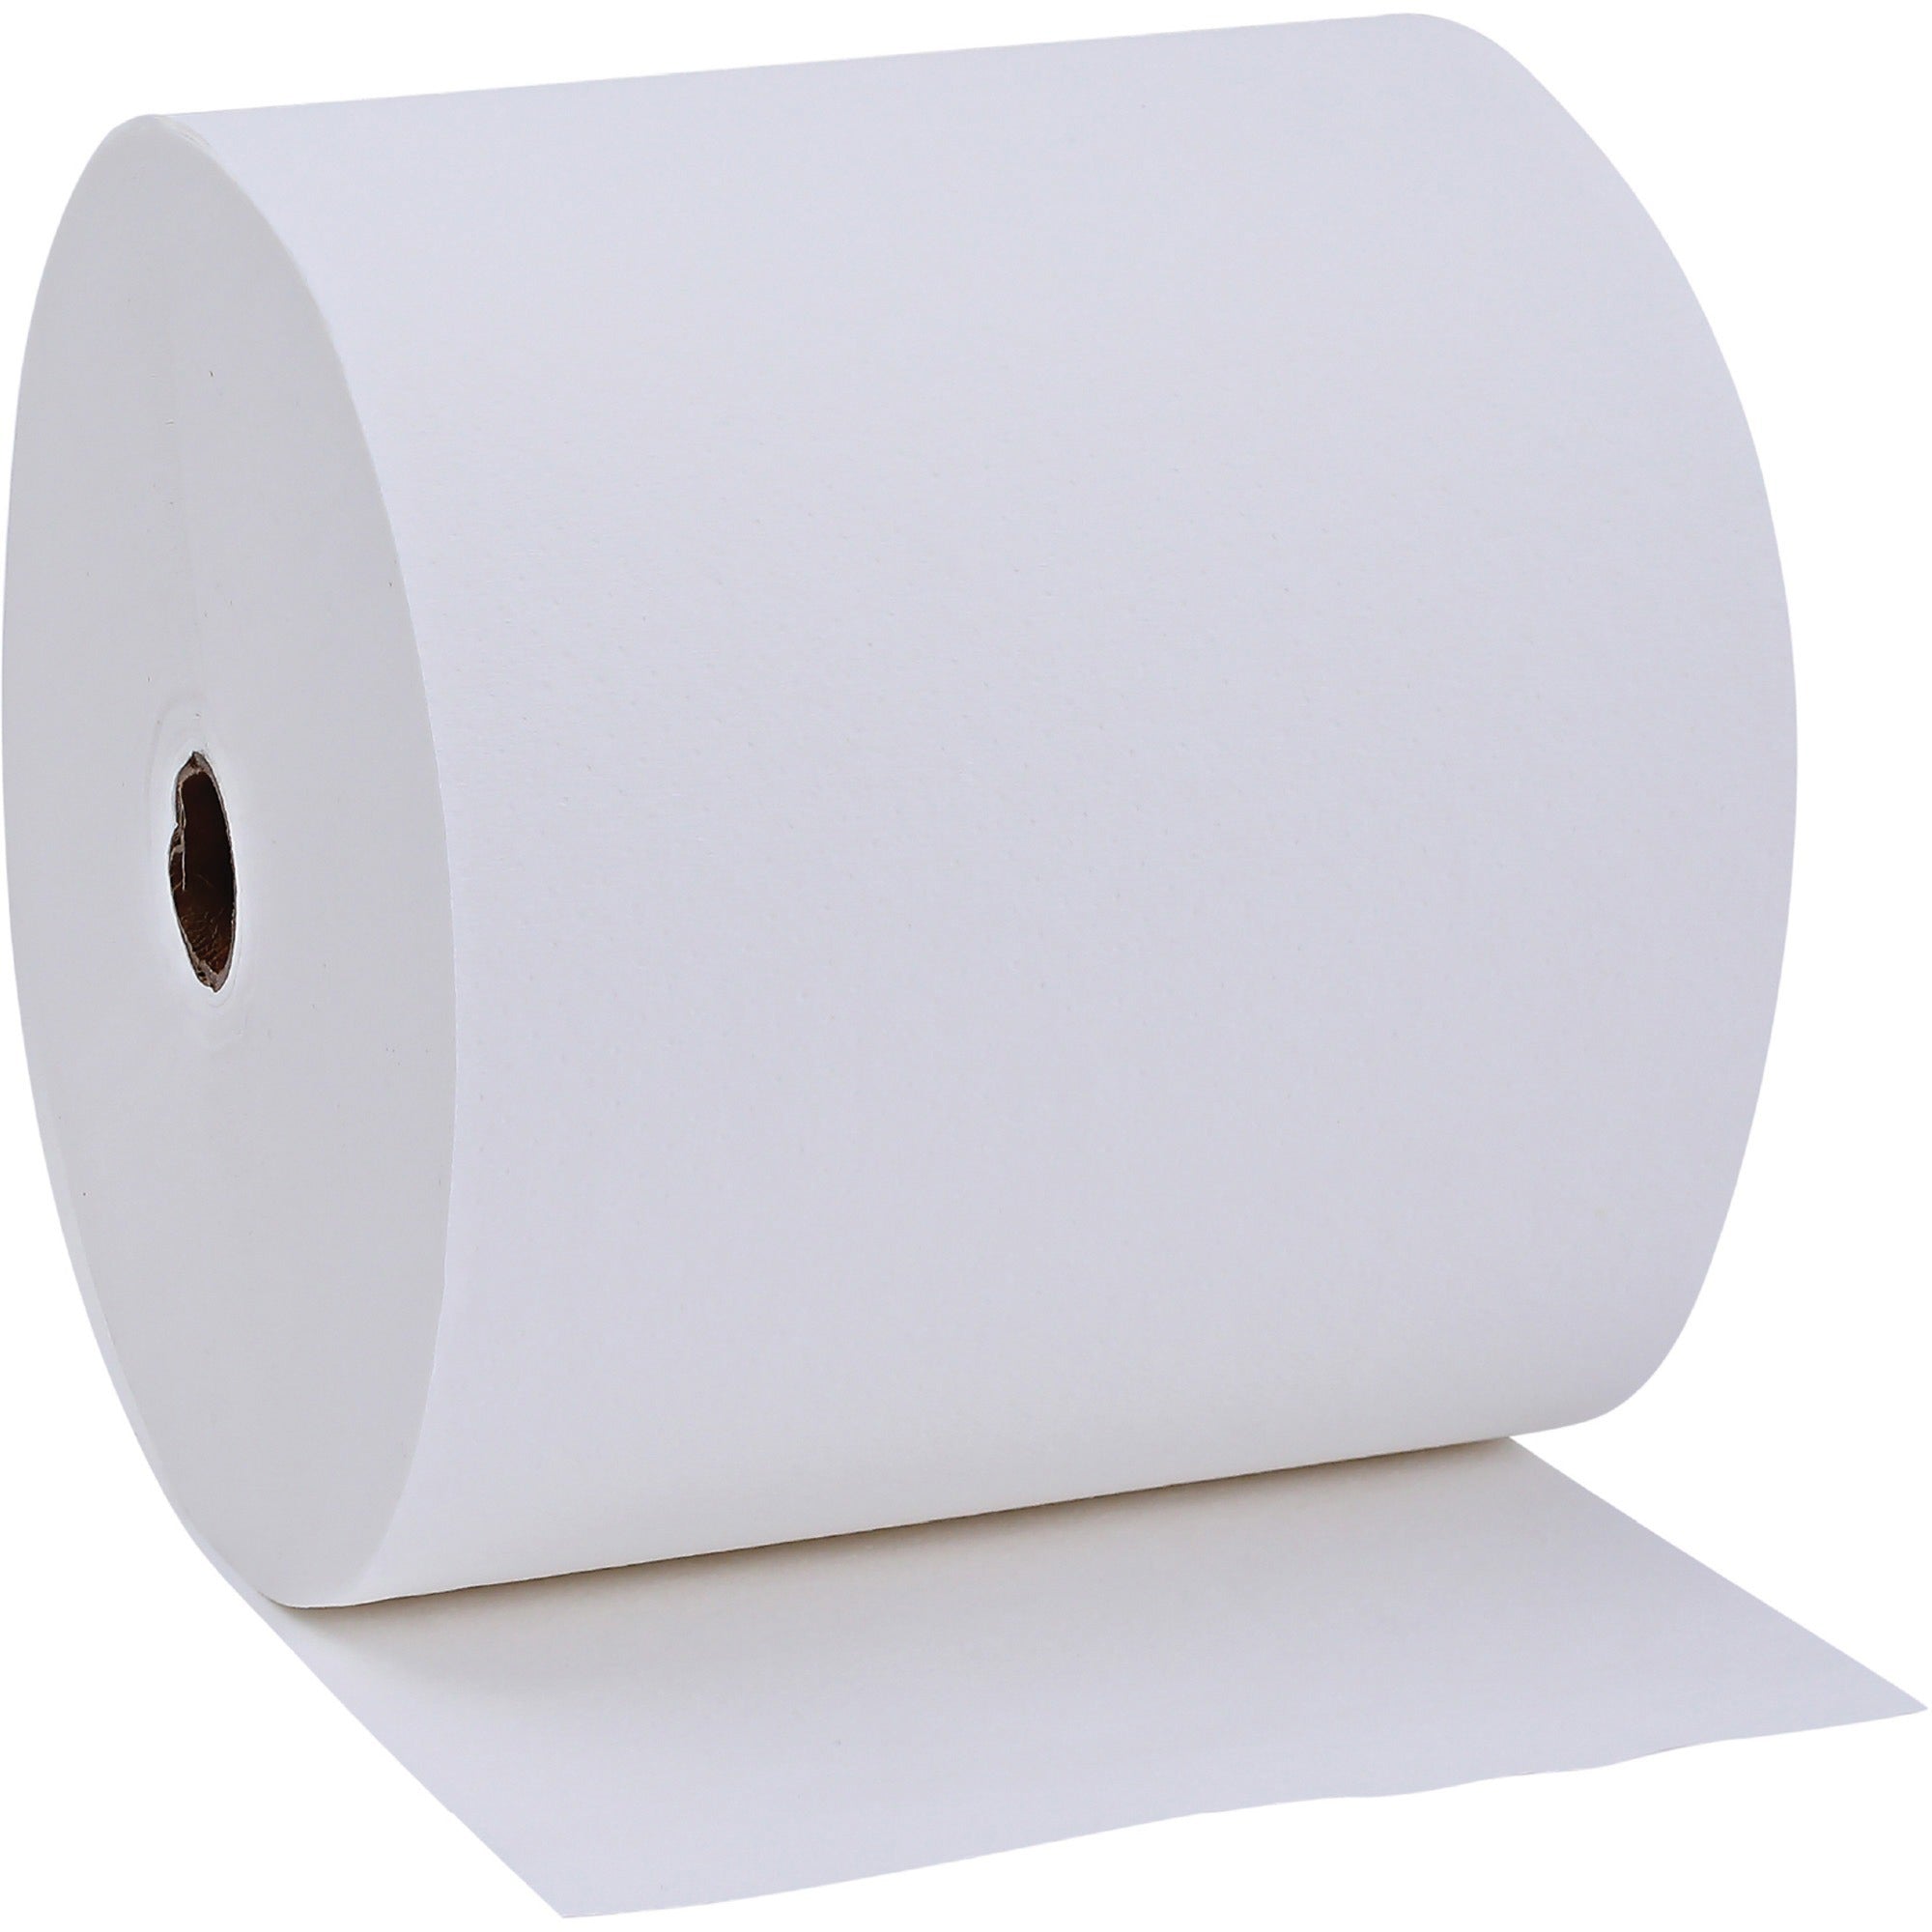 genuine-joe-solutions-1-ply-hardwound-towels-1-ply-7-x-600-ft-098-core-white-virgin-fiber-embossed-absorbent-soft-chlorine-free-strong-6-carton_gjo96007 - 1